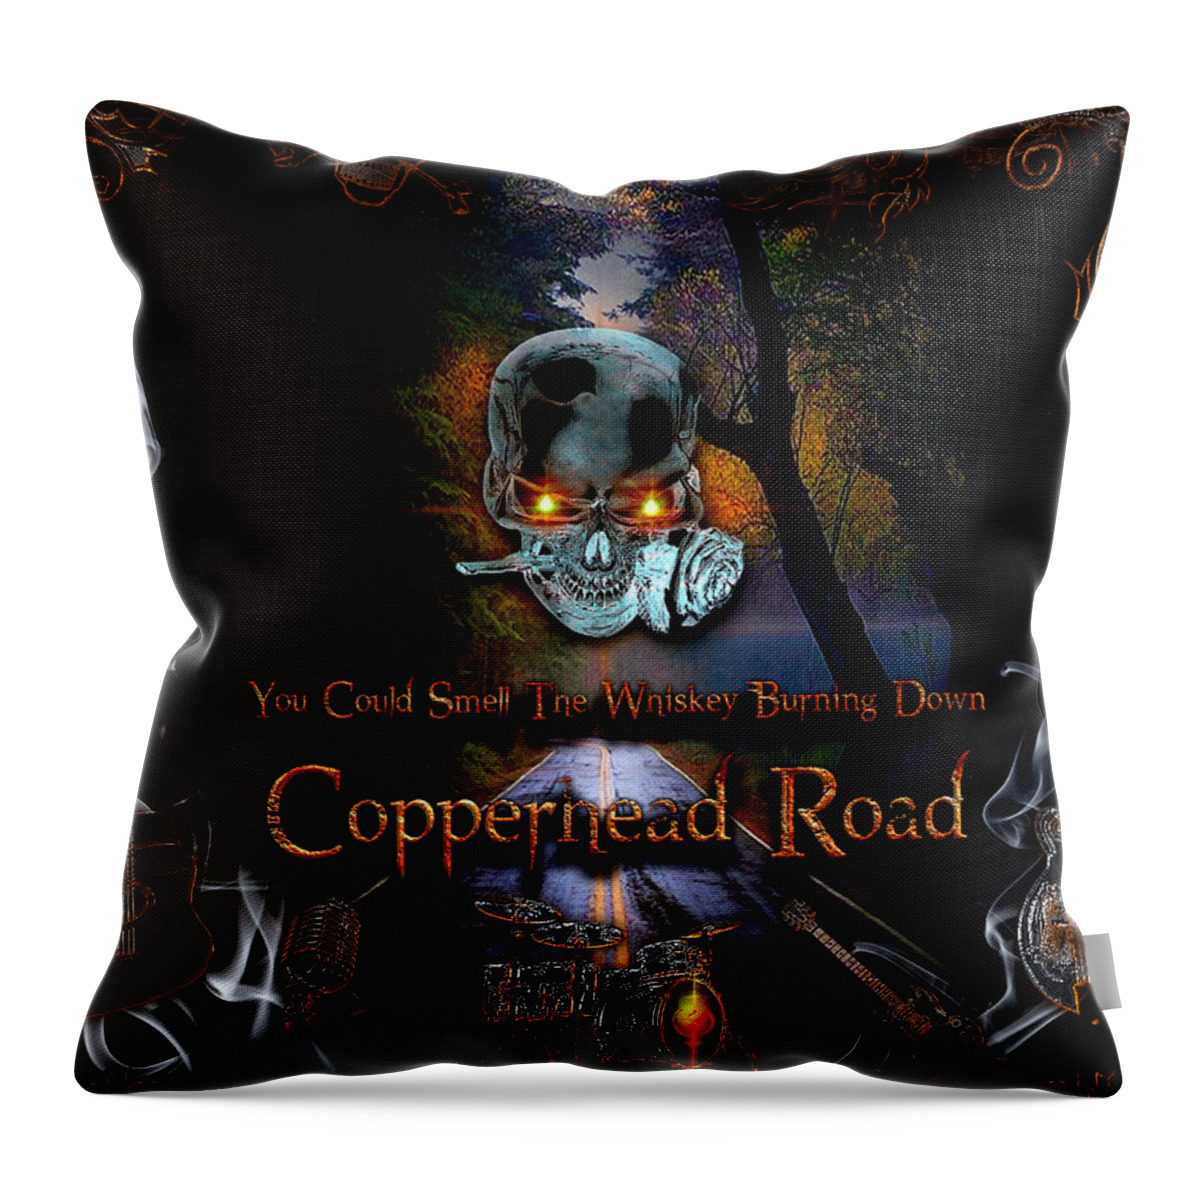 Copperhead Road Throw Pillow featuring the digital art Copperhead Road by Michael Damiani